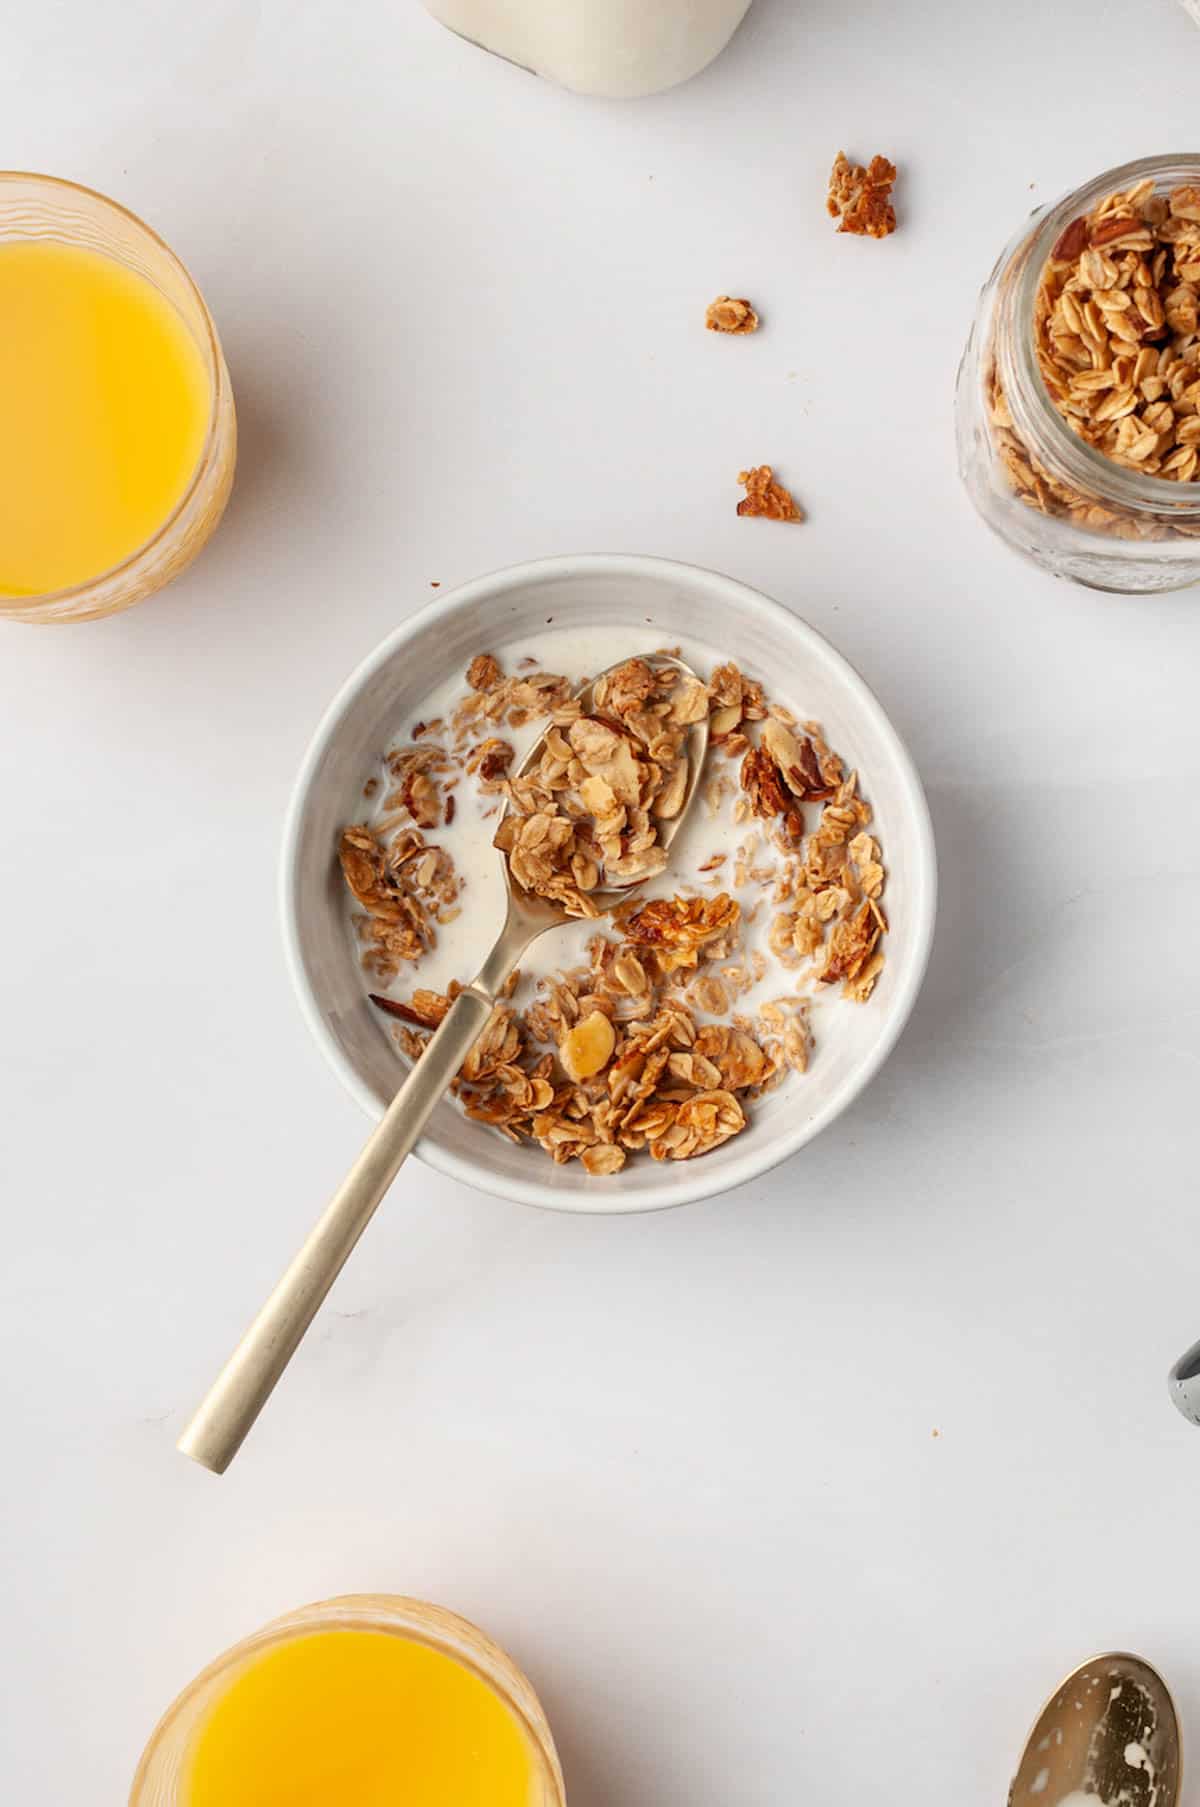 A bowl of granola cereal with milk next to glasses of orange juice.